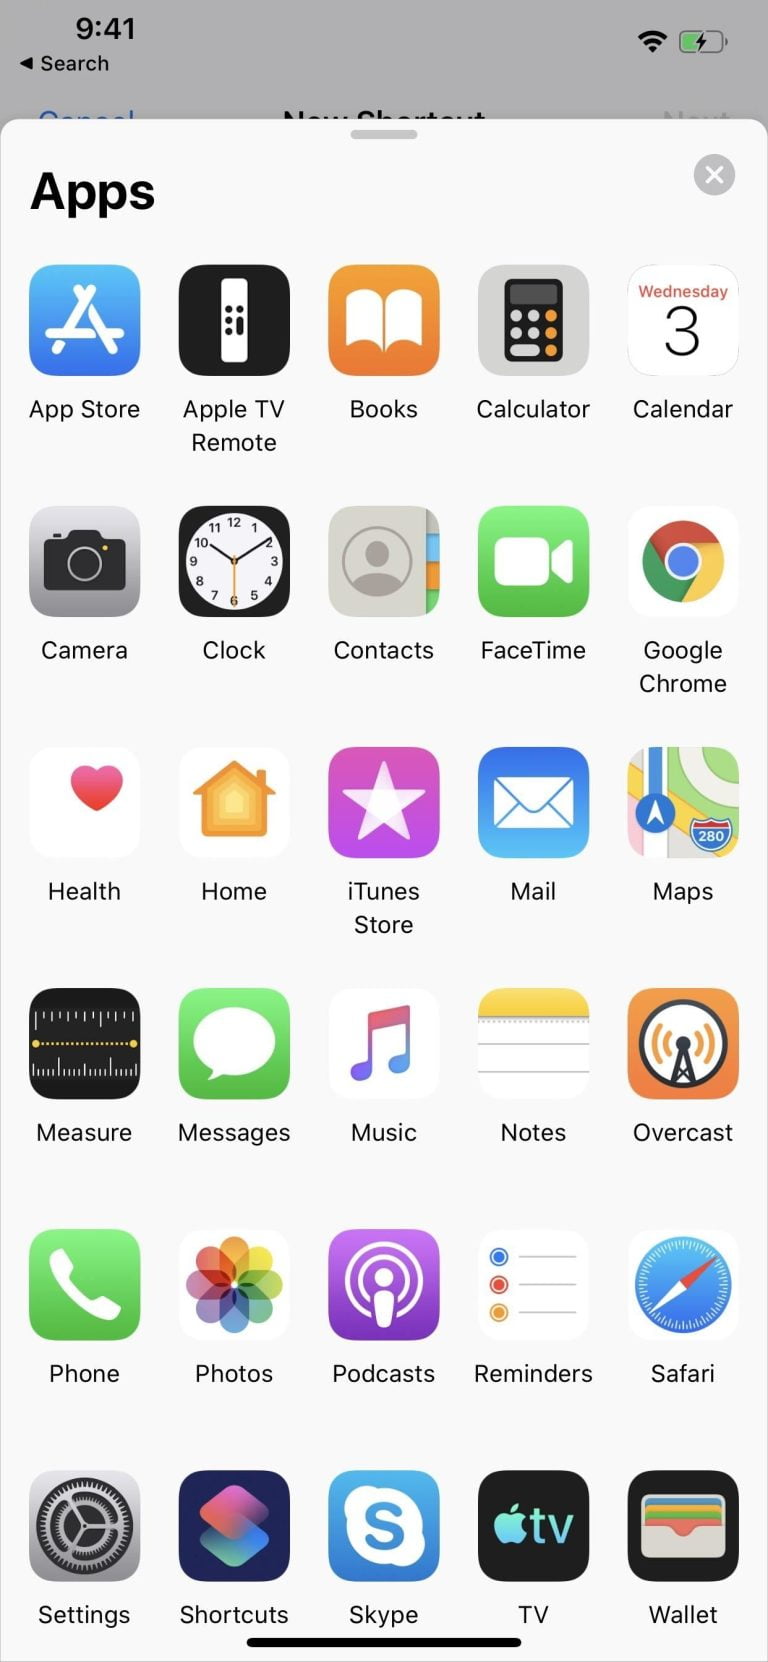 These are all the new features of iOS 9 Beta 3